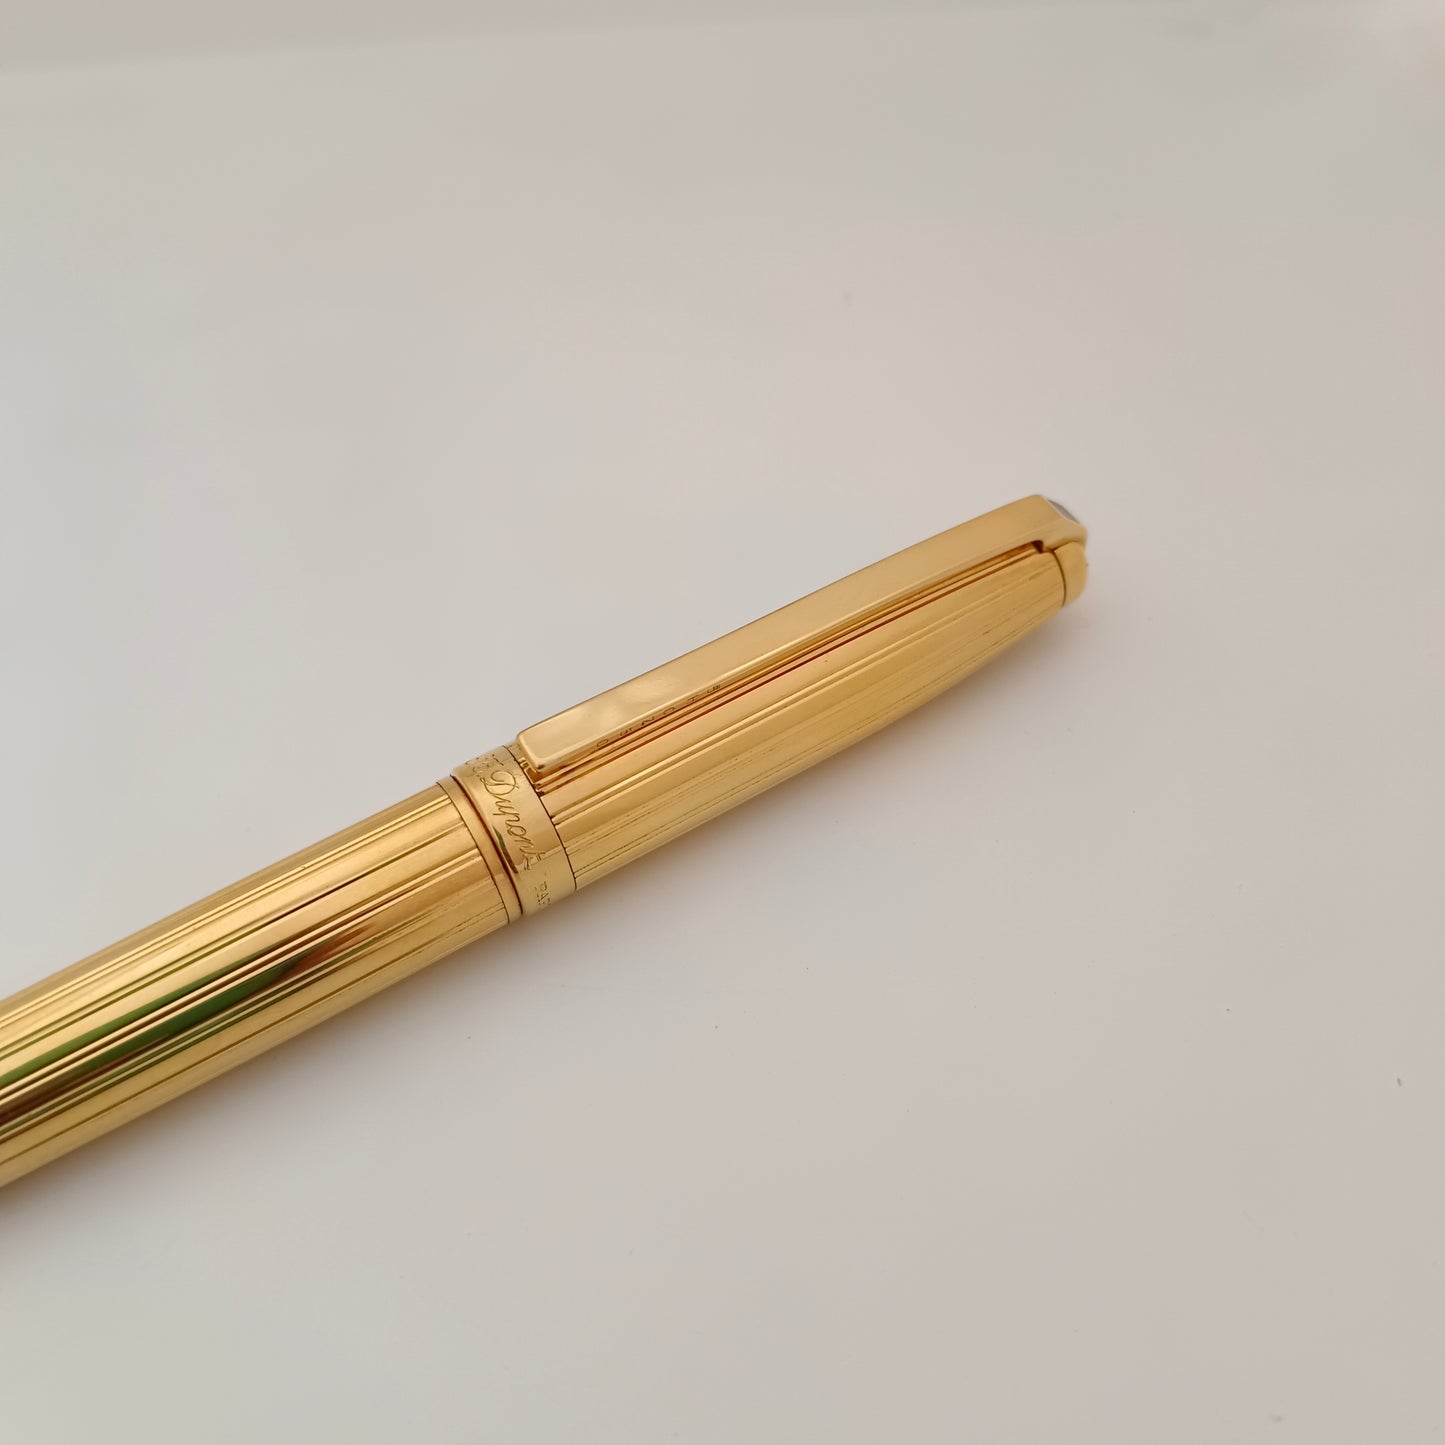 ST Dupont Olympio Gold Plated Pencil